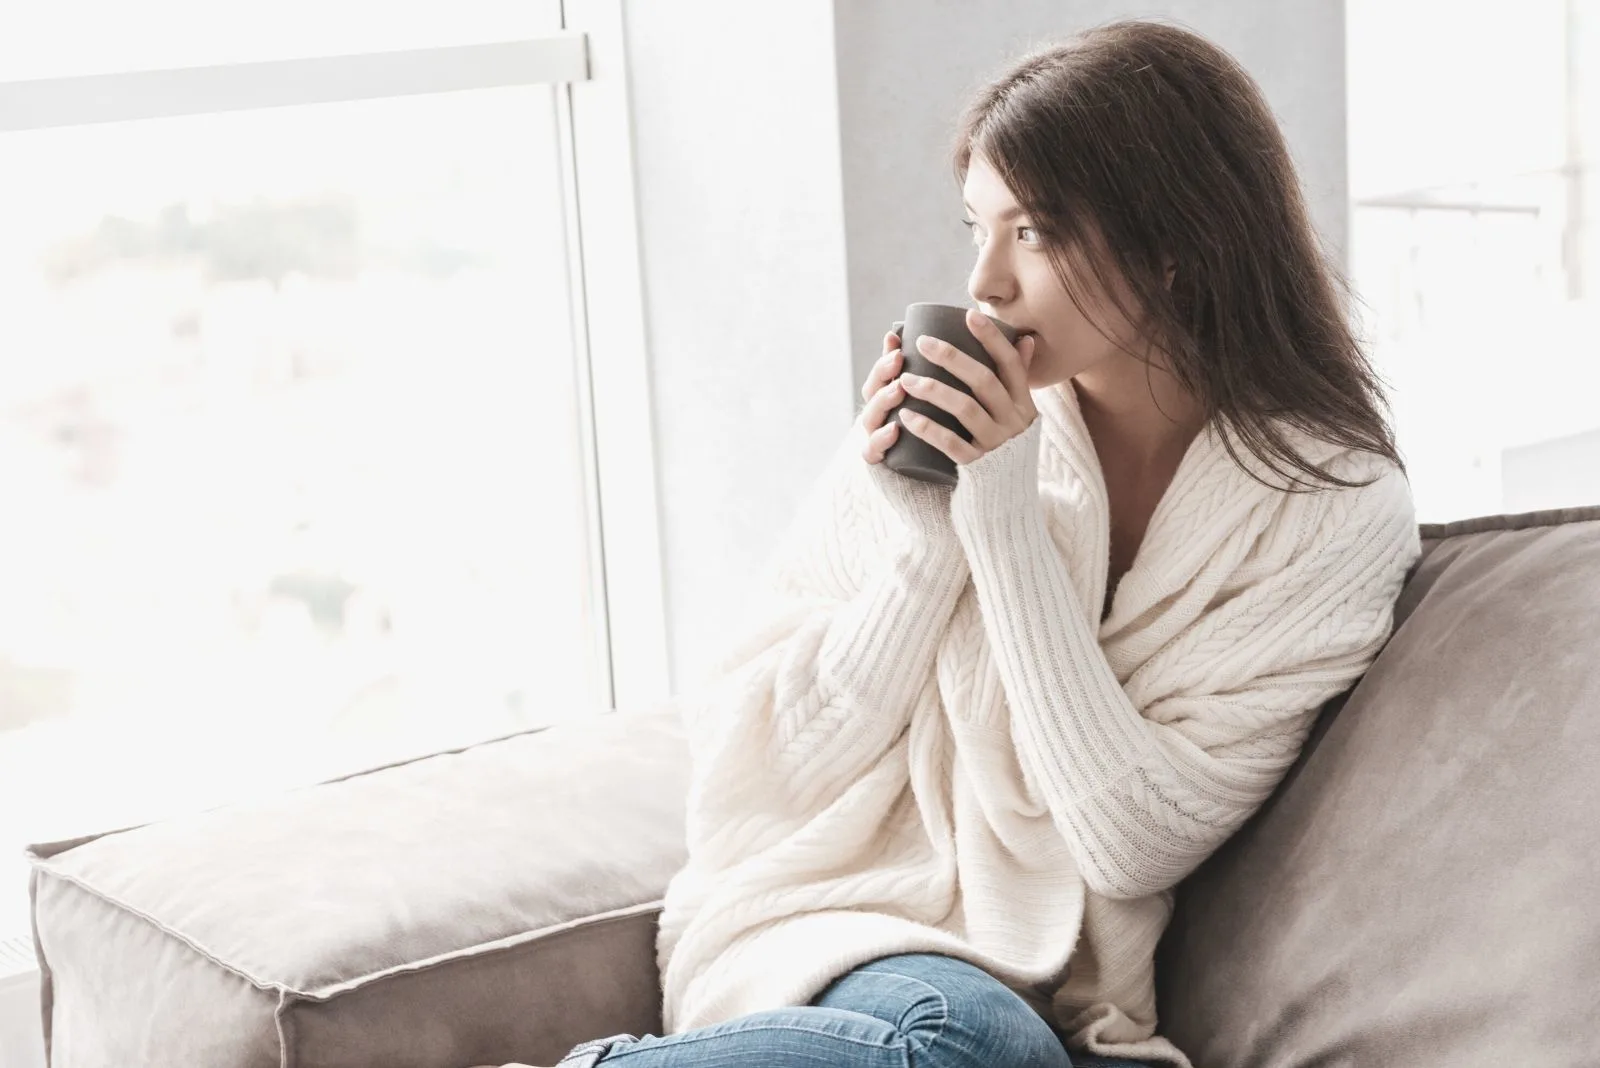 pensive woman drinking from a mug chilling in the sofa inside living room